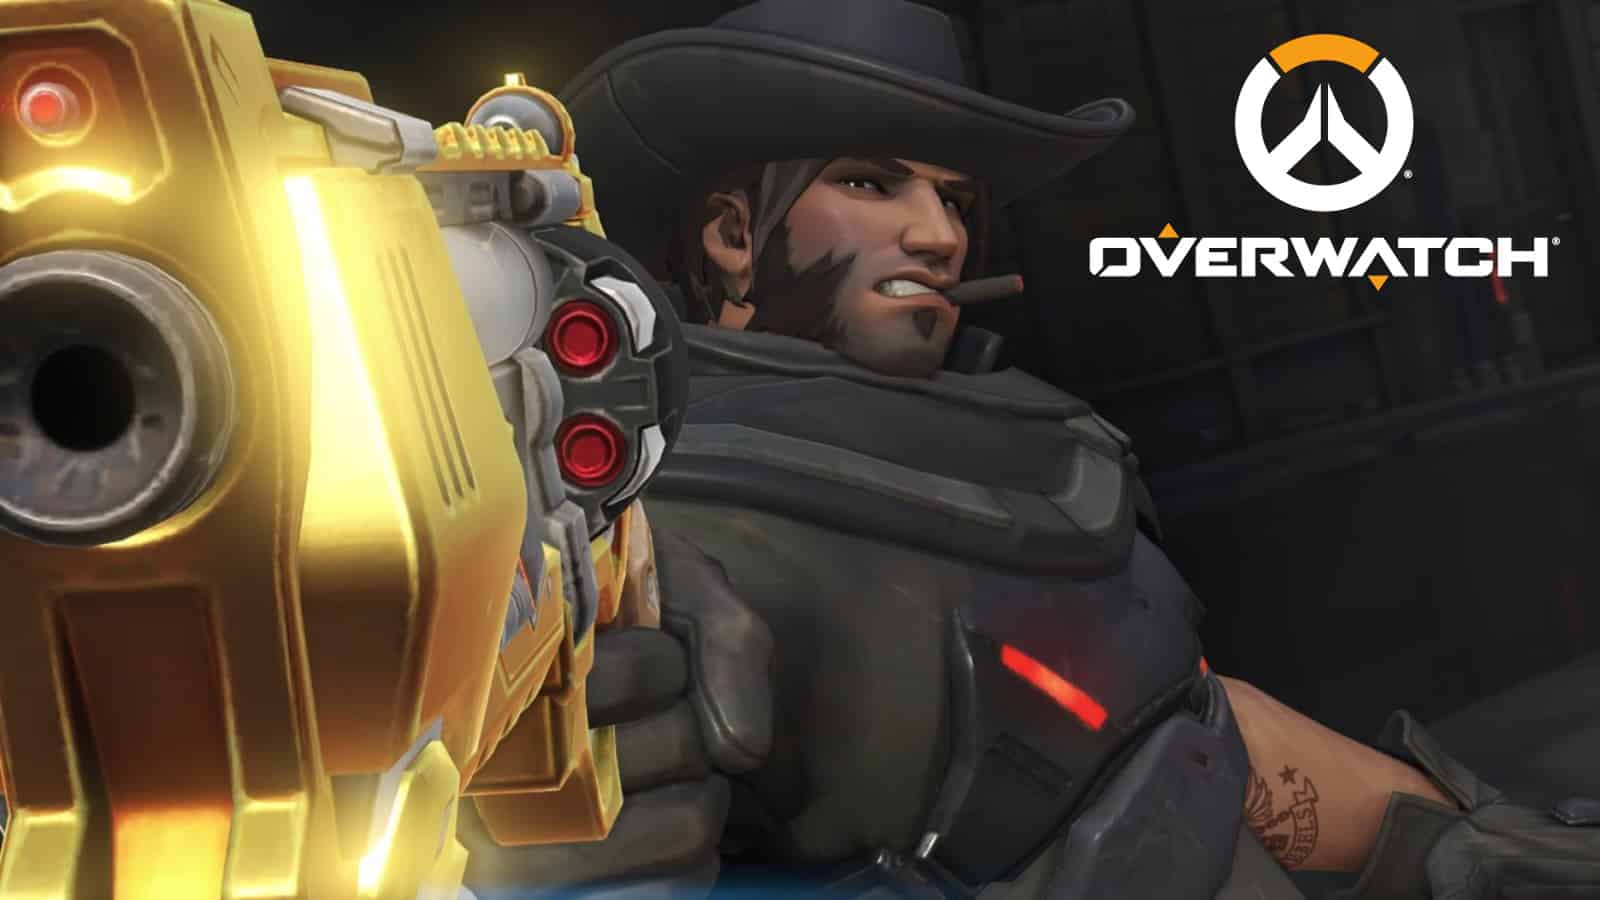 New Overwatch story event with cole cassidy